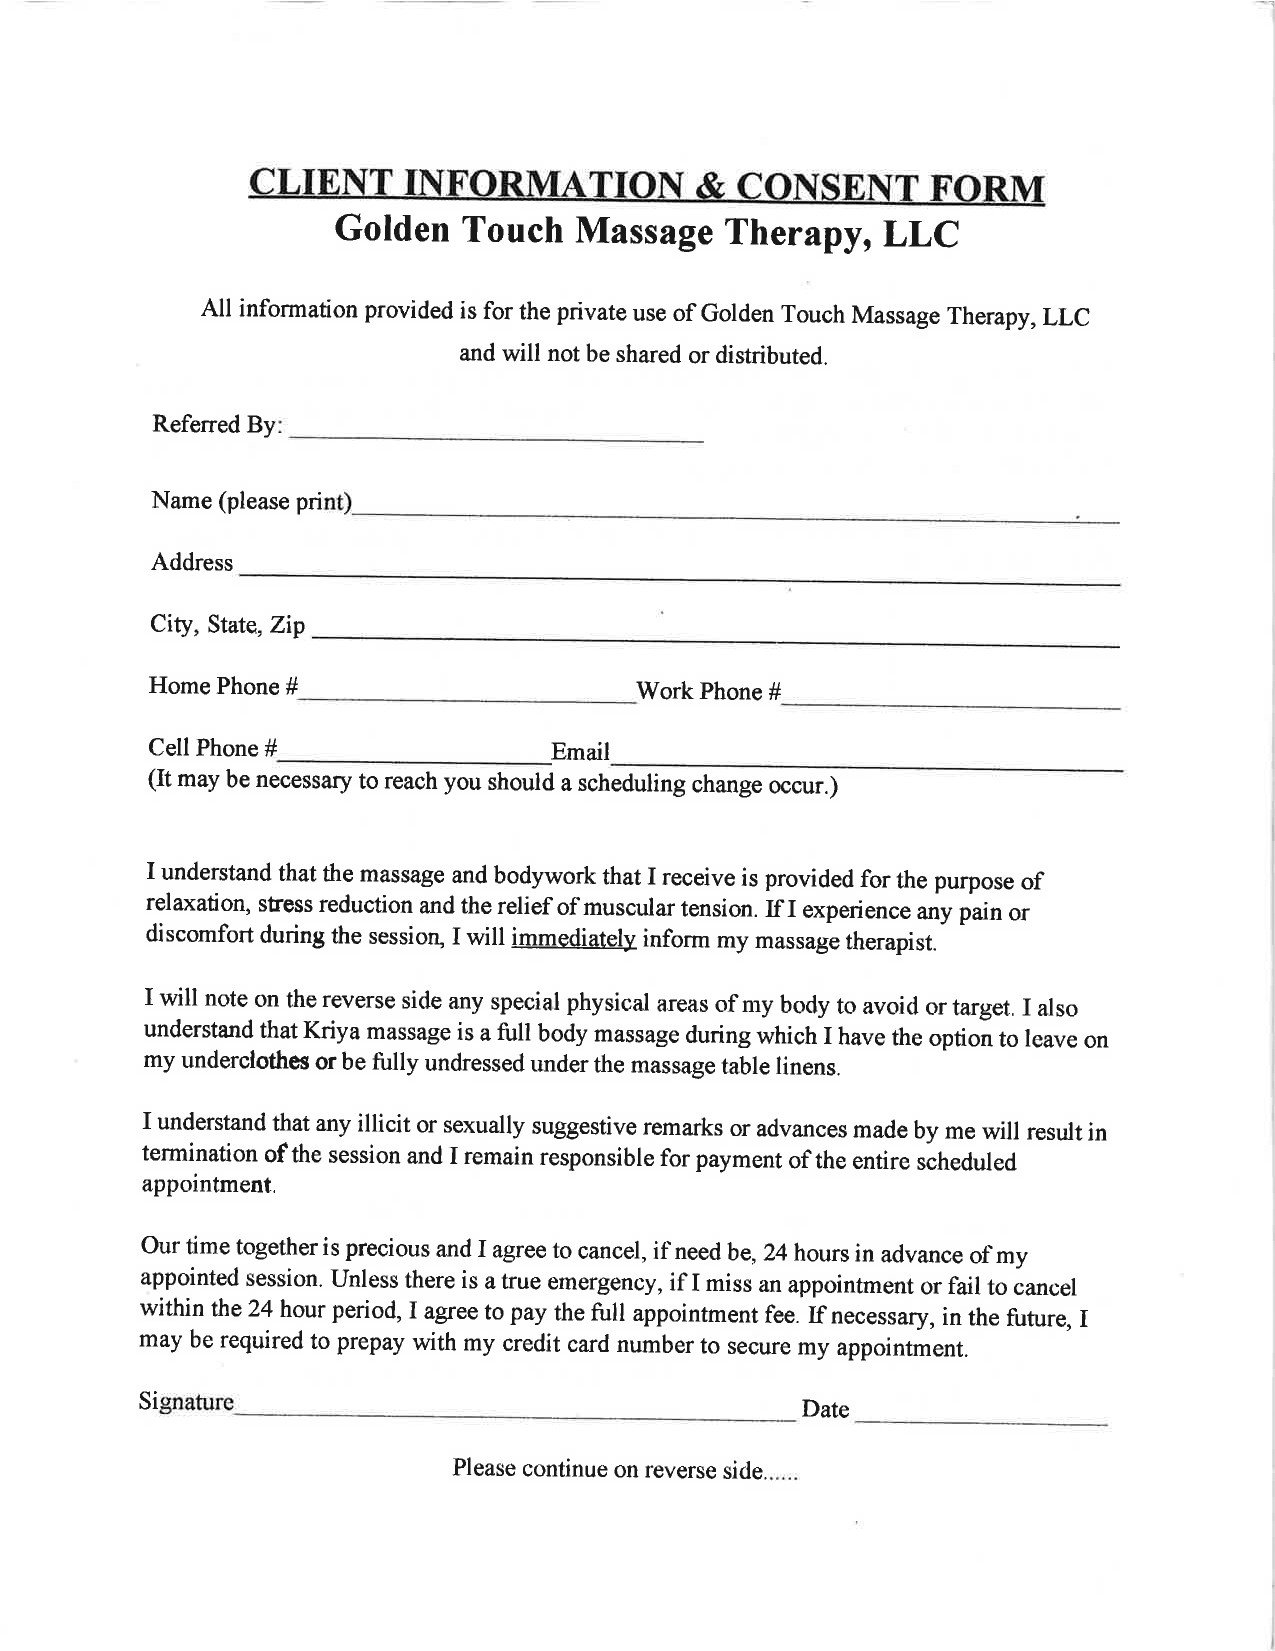 Client Intake form Template Golden touch Massage therapy Client Intake form